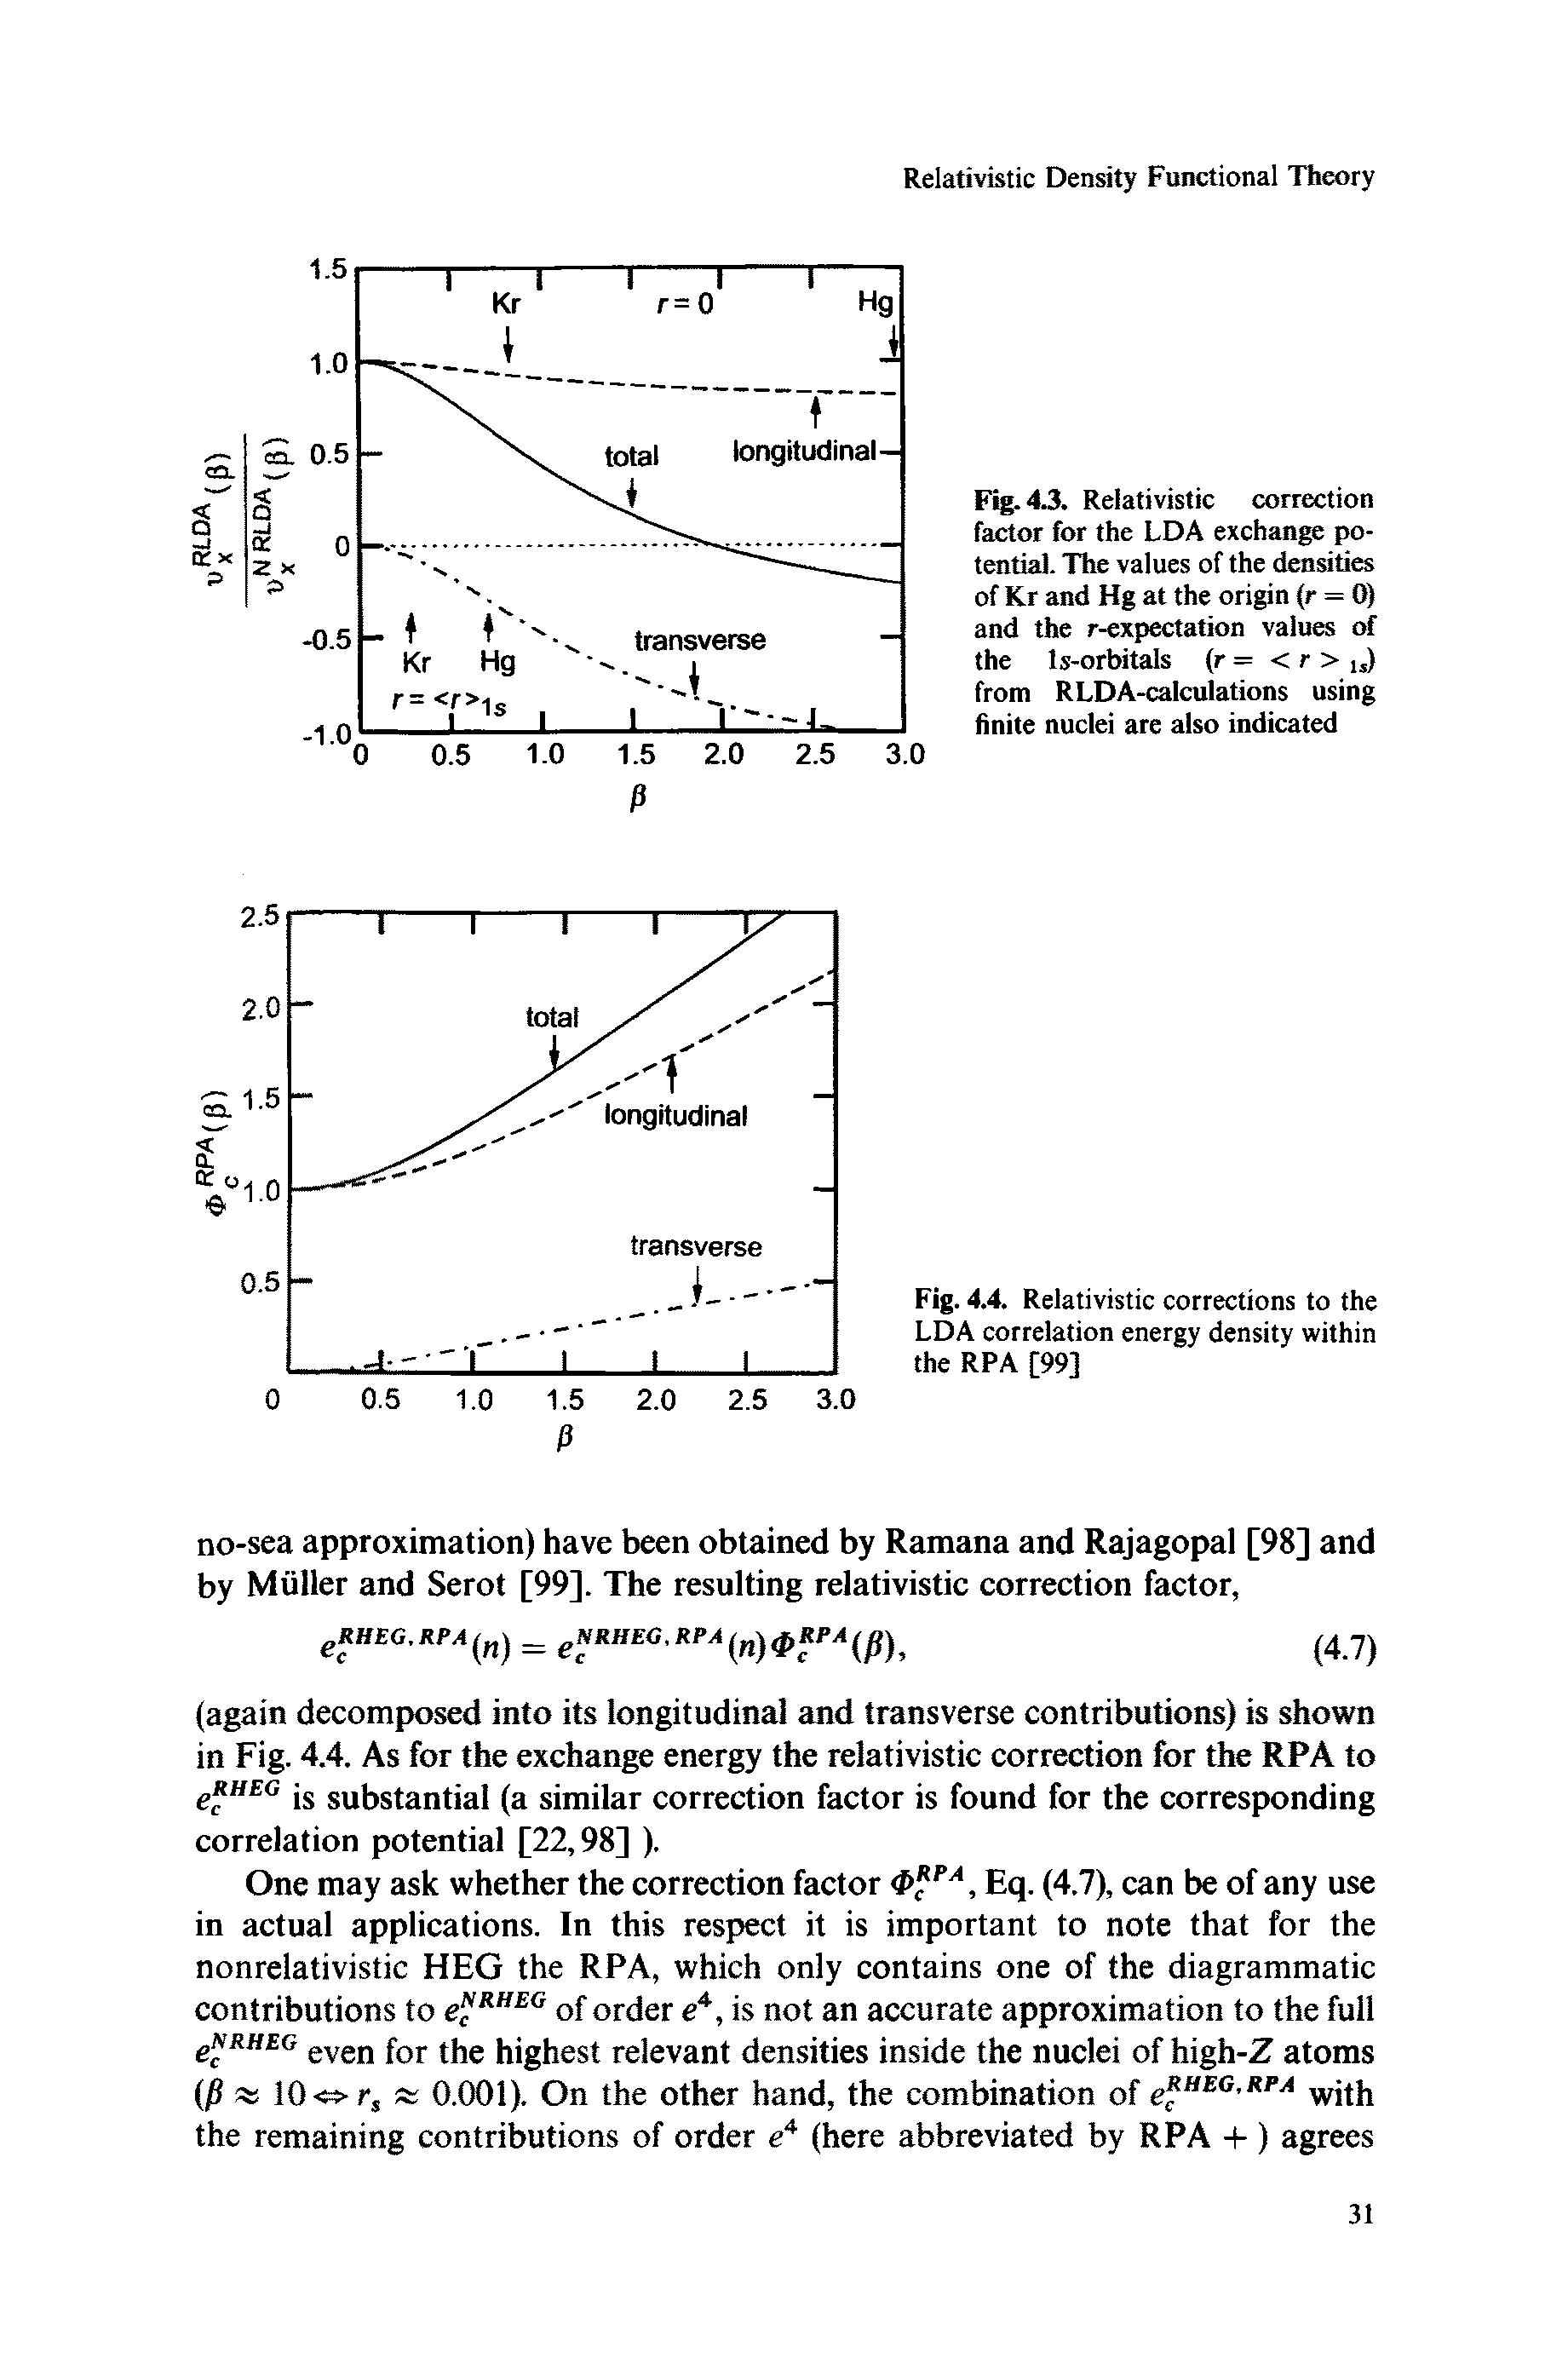 Fig. 4.3. Relativistic correction factor for the LDA exchange potential. The values of the densities of Kr and Hg at the origin (r = 0) and the r-expectation values of the Is-orbitals (r = < r >, 5) from RLDA-calculations using finite nuclei are also indicated...